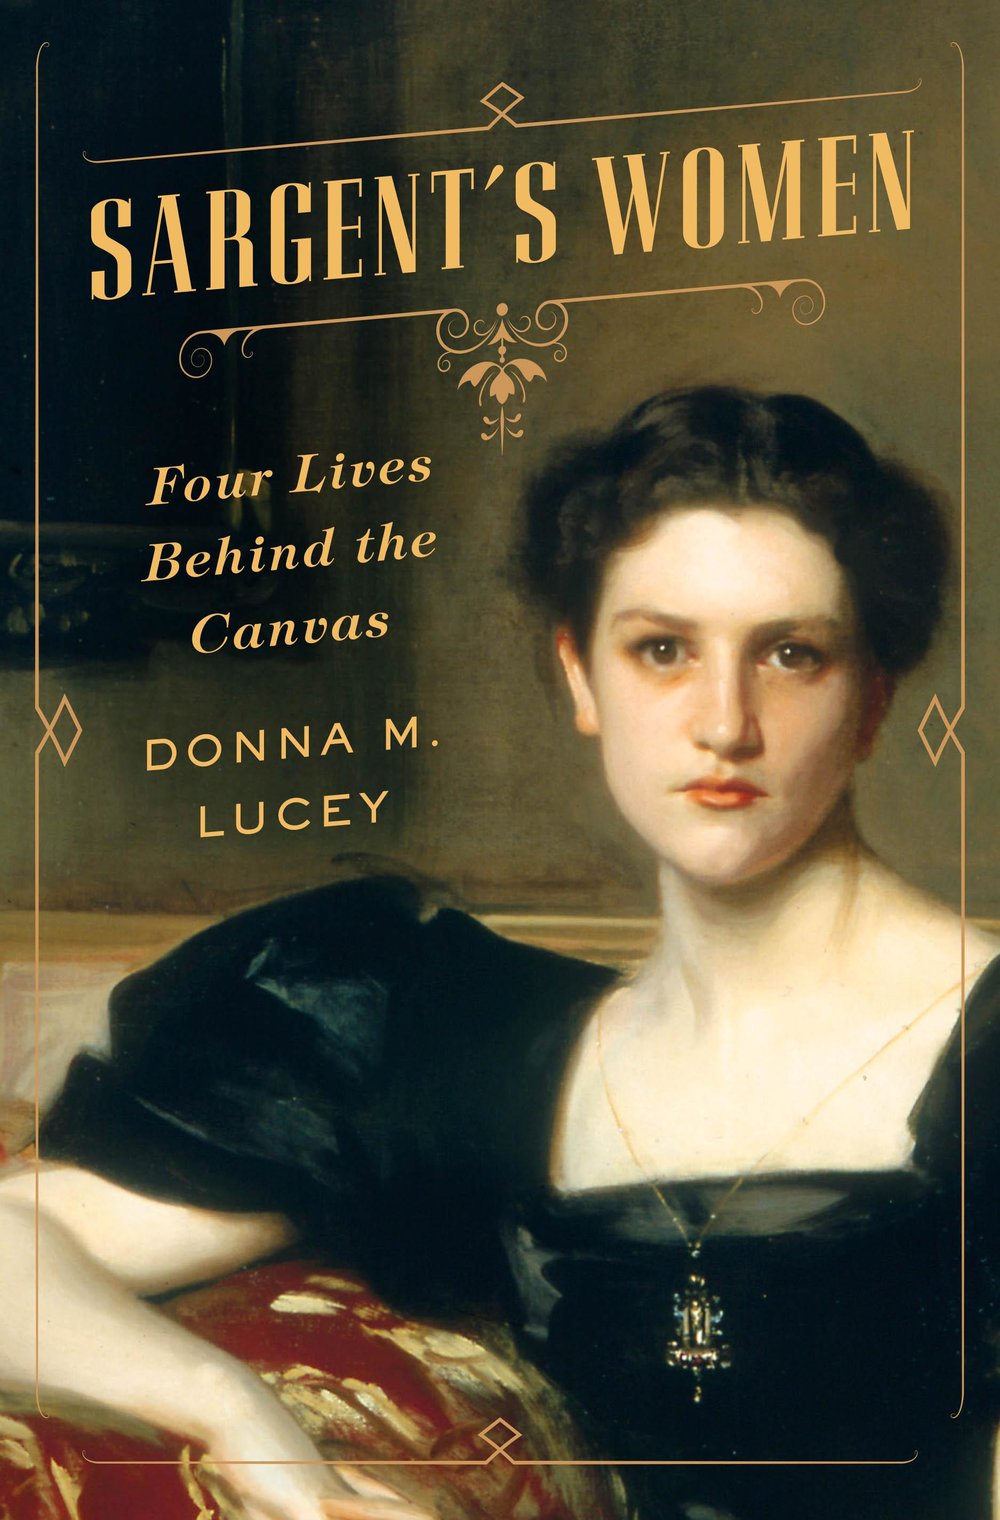 sargent's women by donna m lucey.jpg